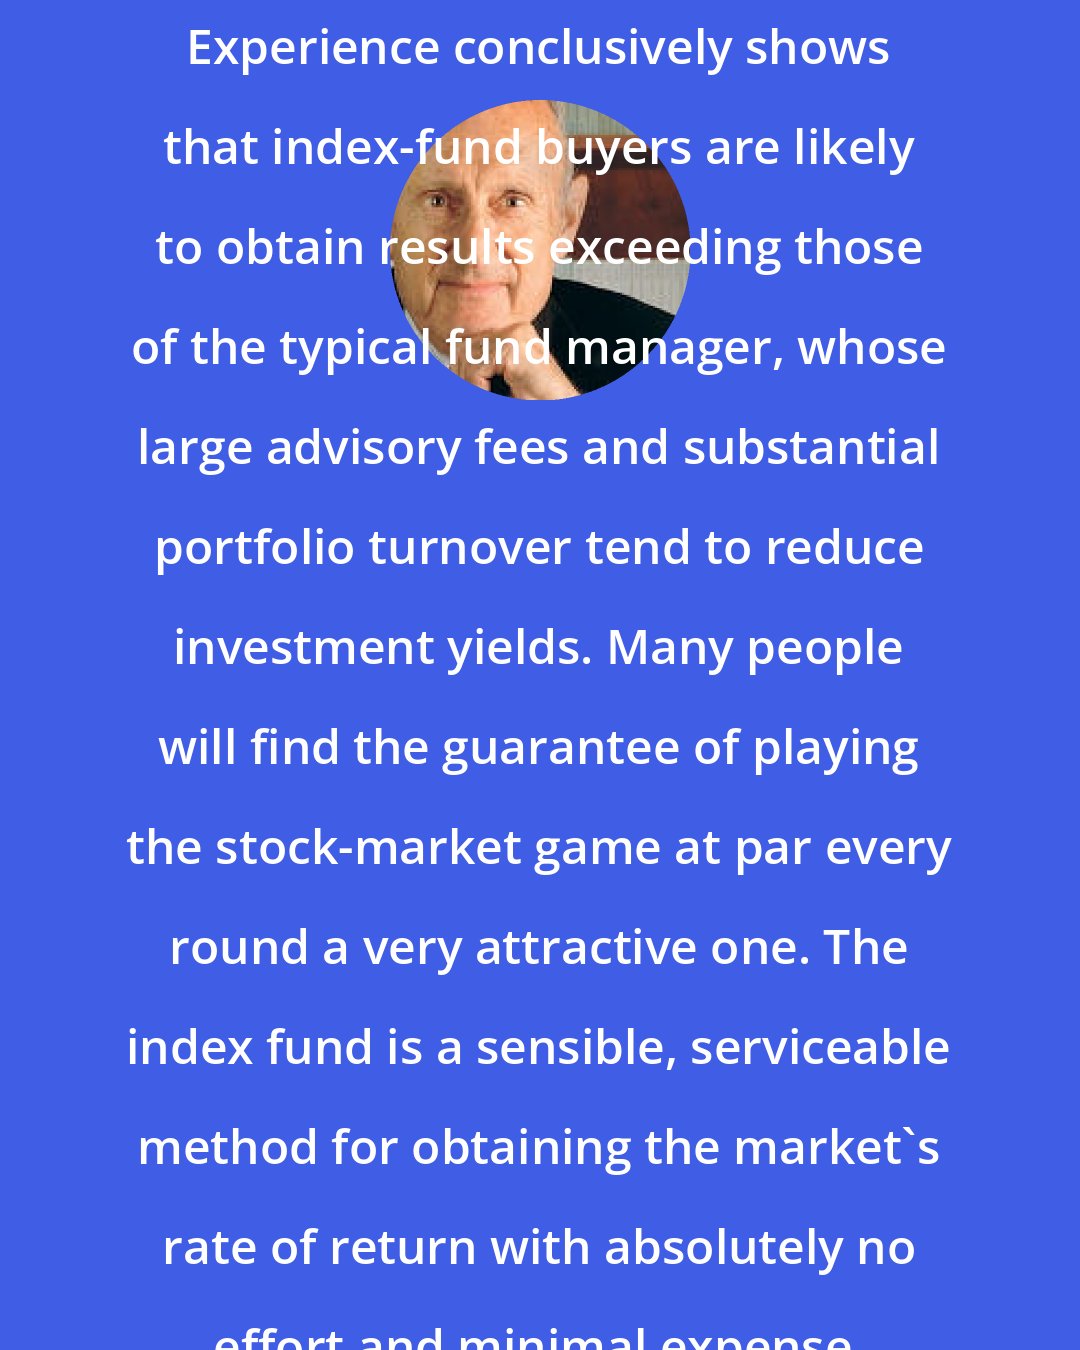 Burton Malkiel: Experience conclusively shows that index-fund buyers are likely to obtain results exceeding those of the typical fund manager, whose large advisory fees and substantial portfolio turnover tend to reduce investment yields. Many people will find the guarantee of playing the stock-market game at par every round a very attractive one. The index fund is a sensible, serviceable method for obtaining the market's rate of return with absolutely no effort and minimal expense.